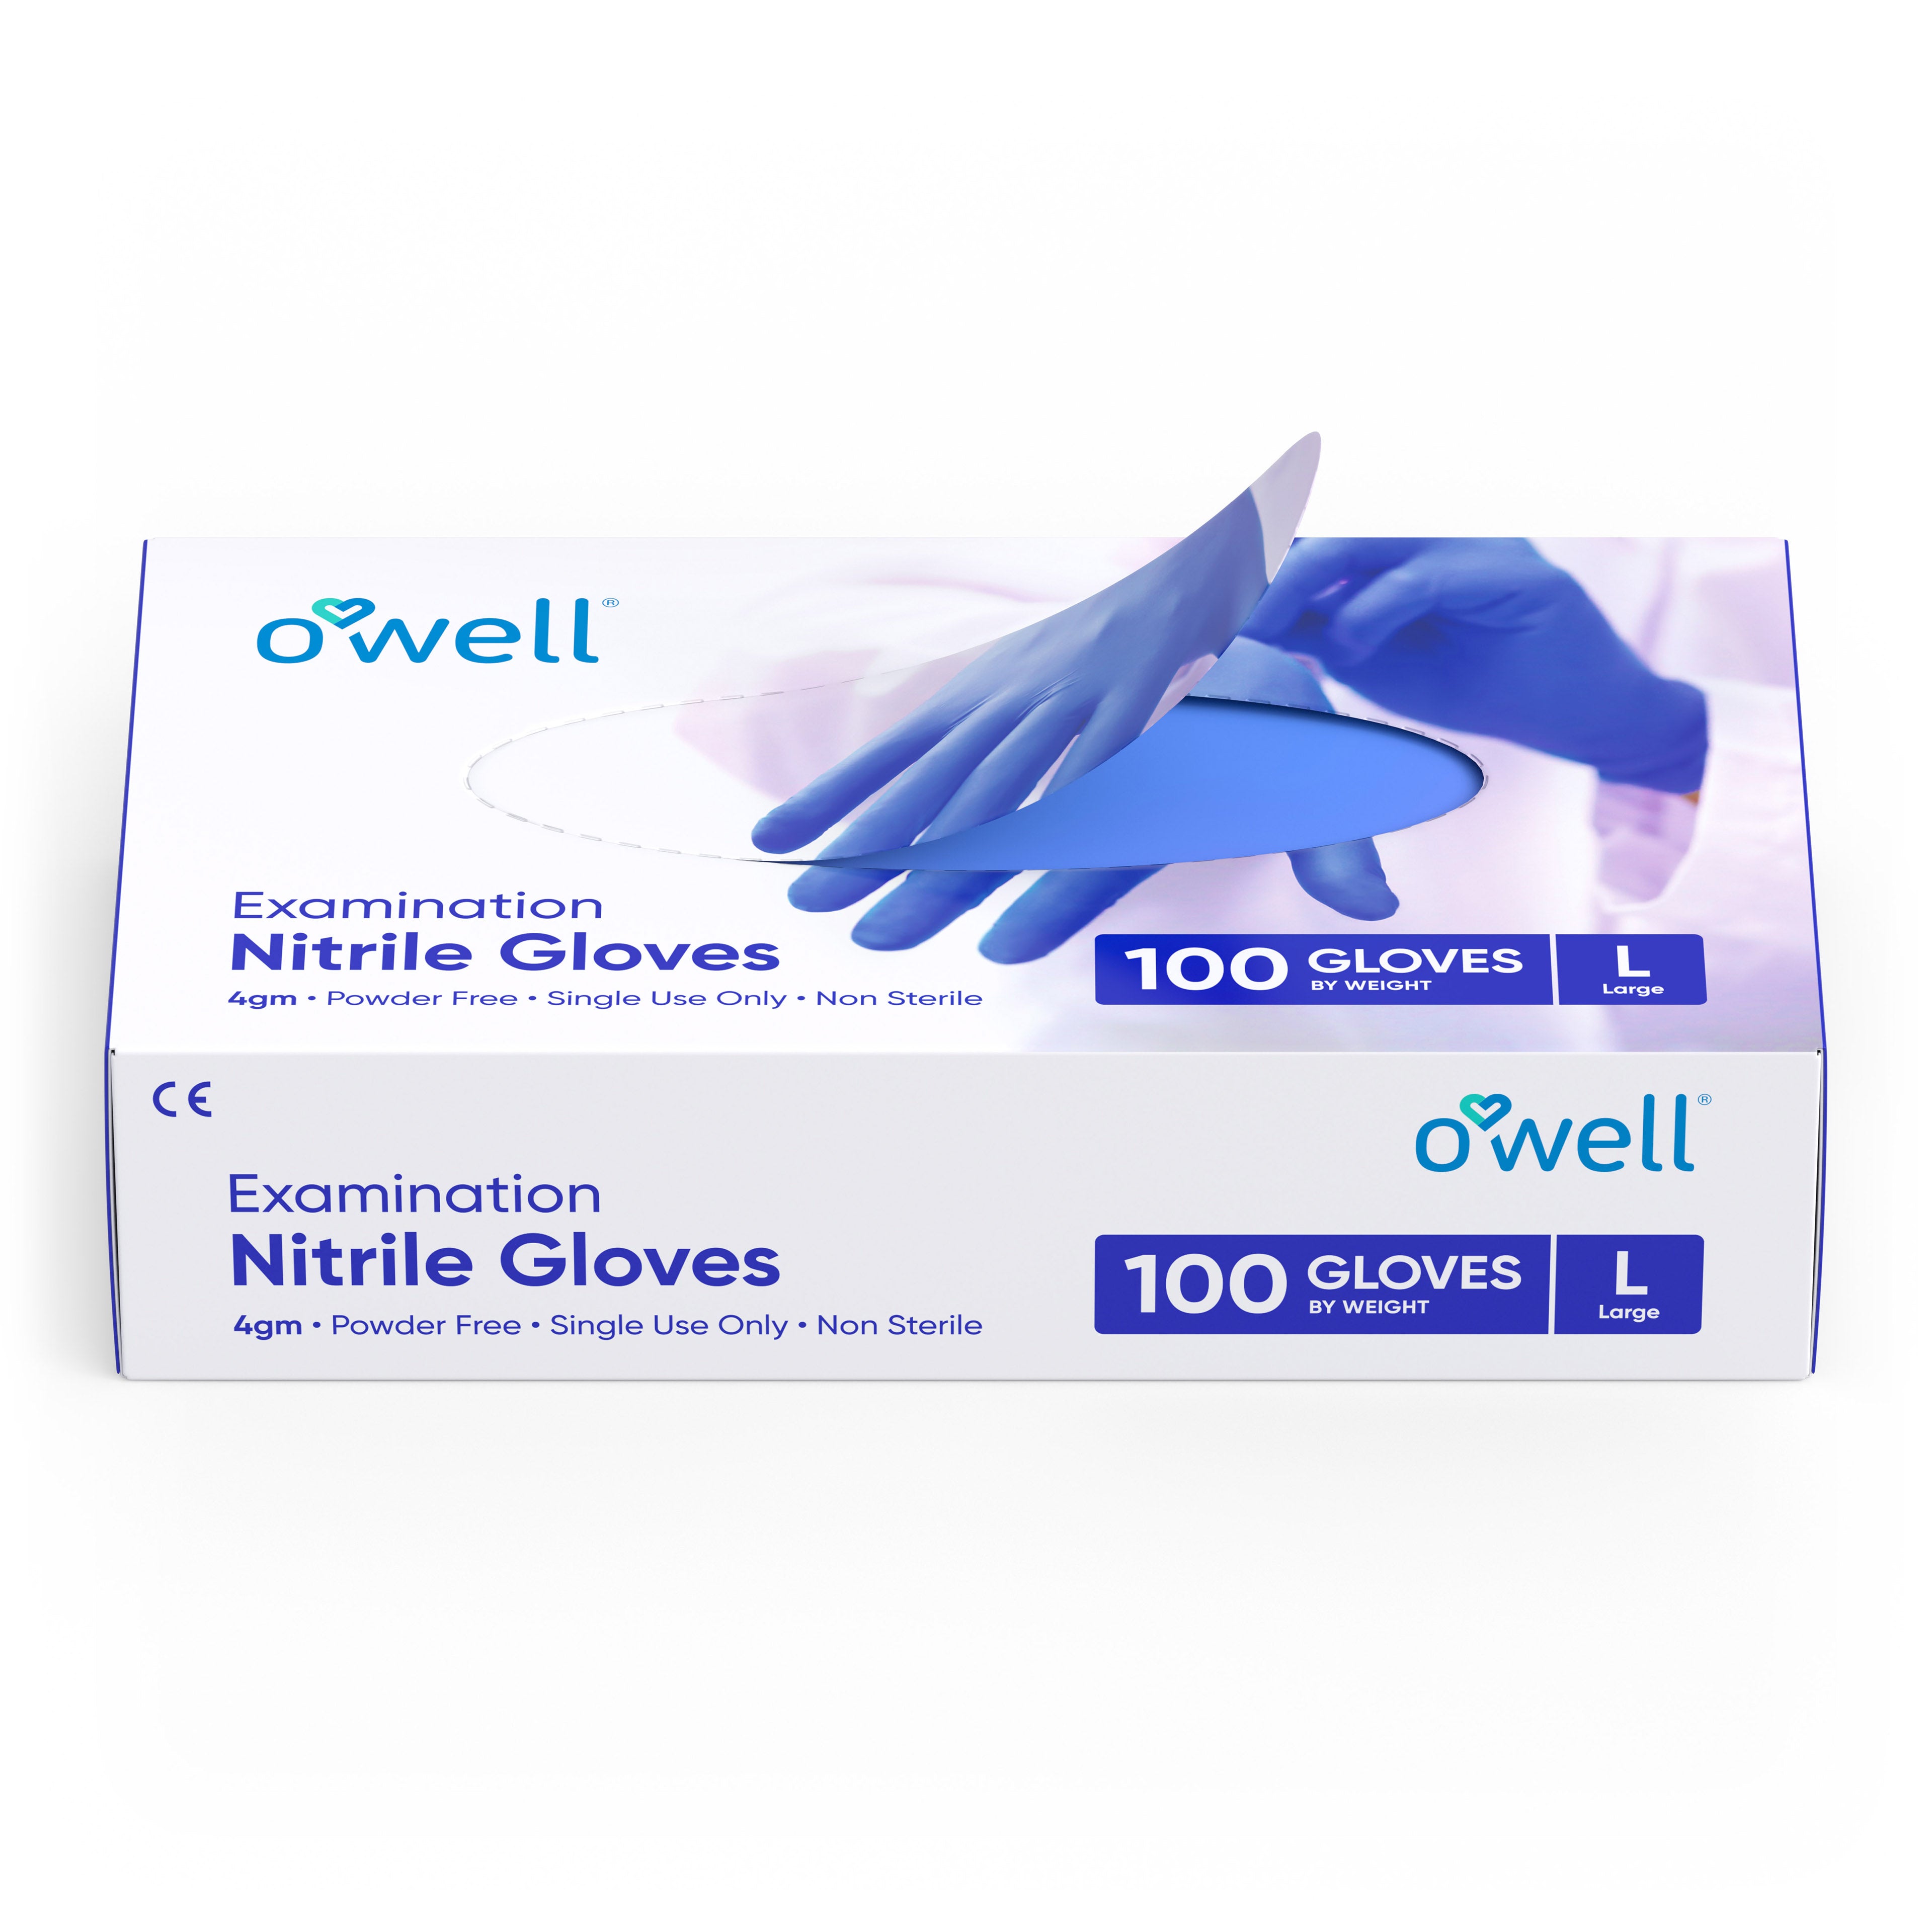 OWELL Nitrile Gloves | 4mil Disposable Gloves, Medical Exam, Food Safe Certified, Chemo Rated, Latex Free, Powder Free, Medical Examination Gloves